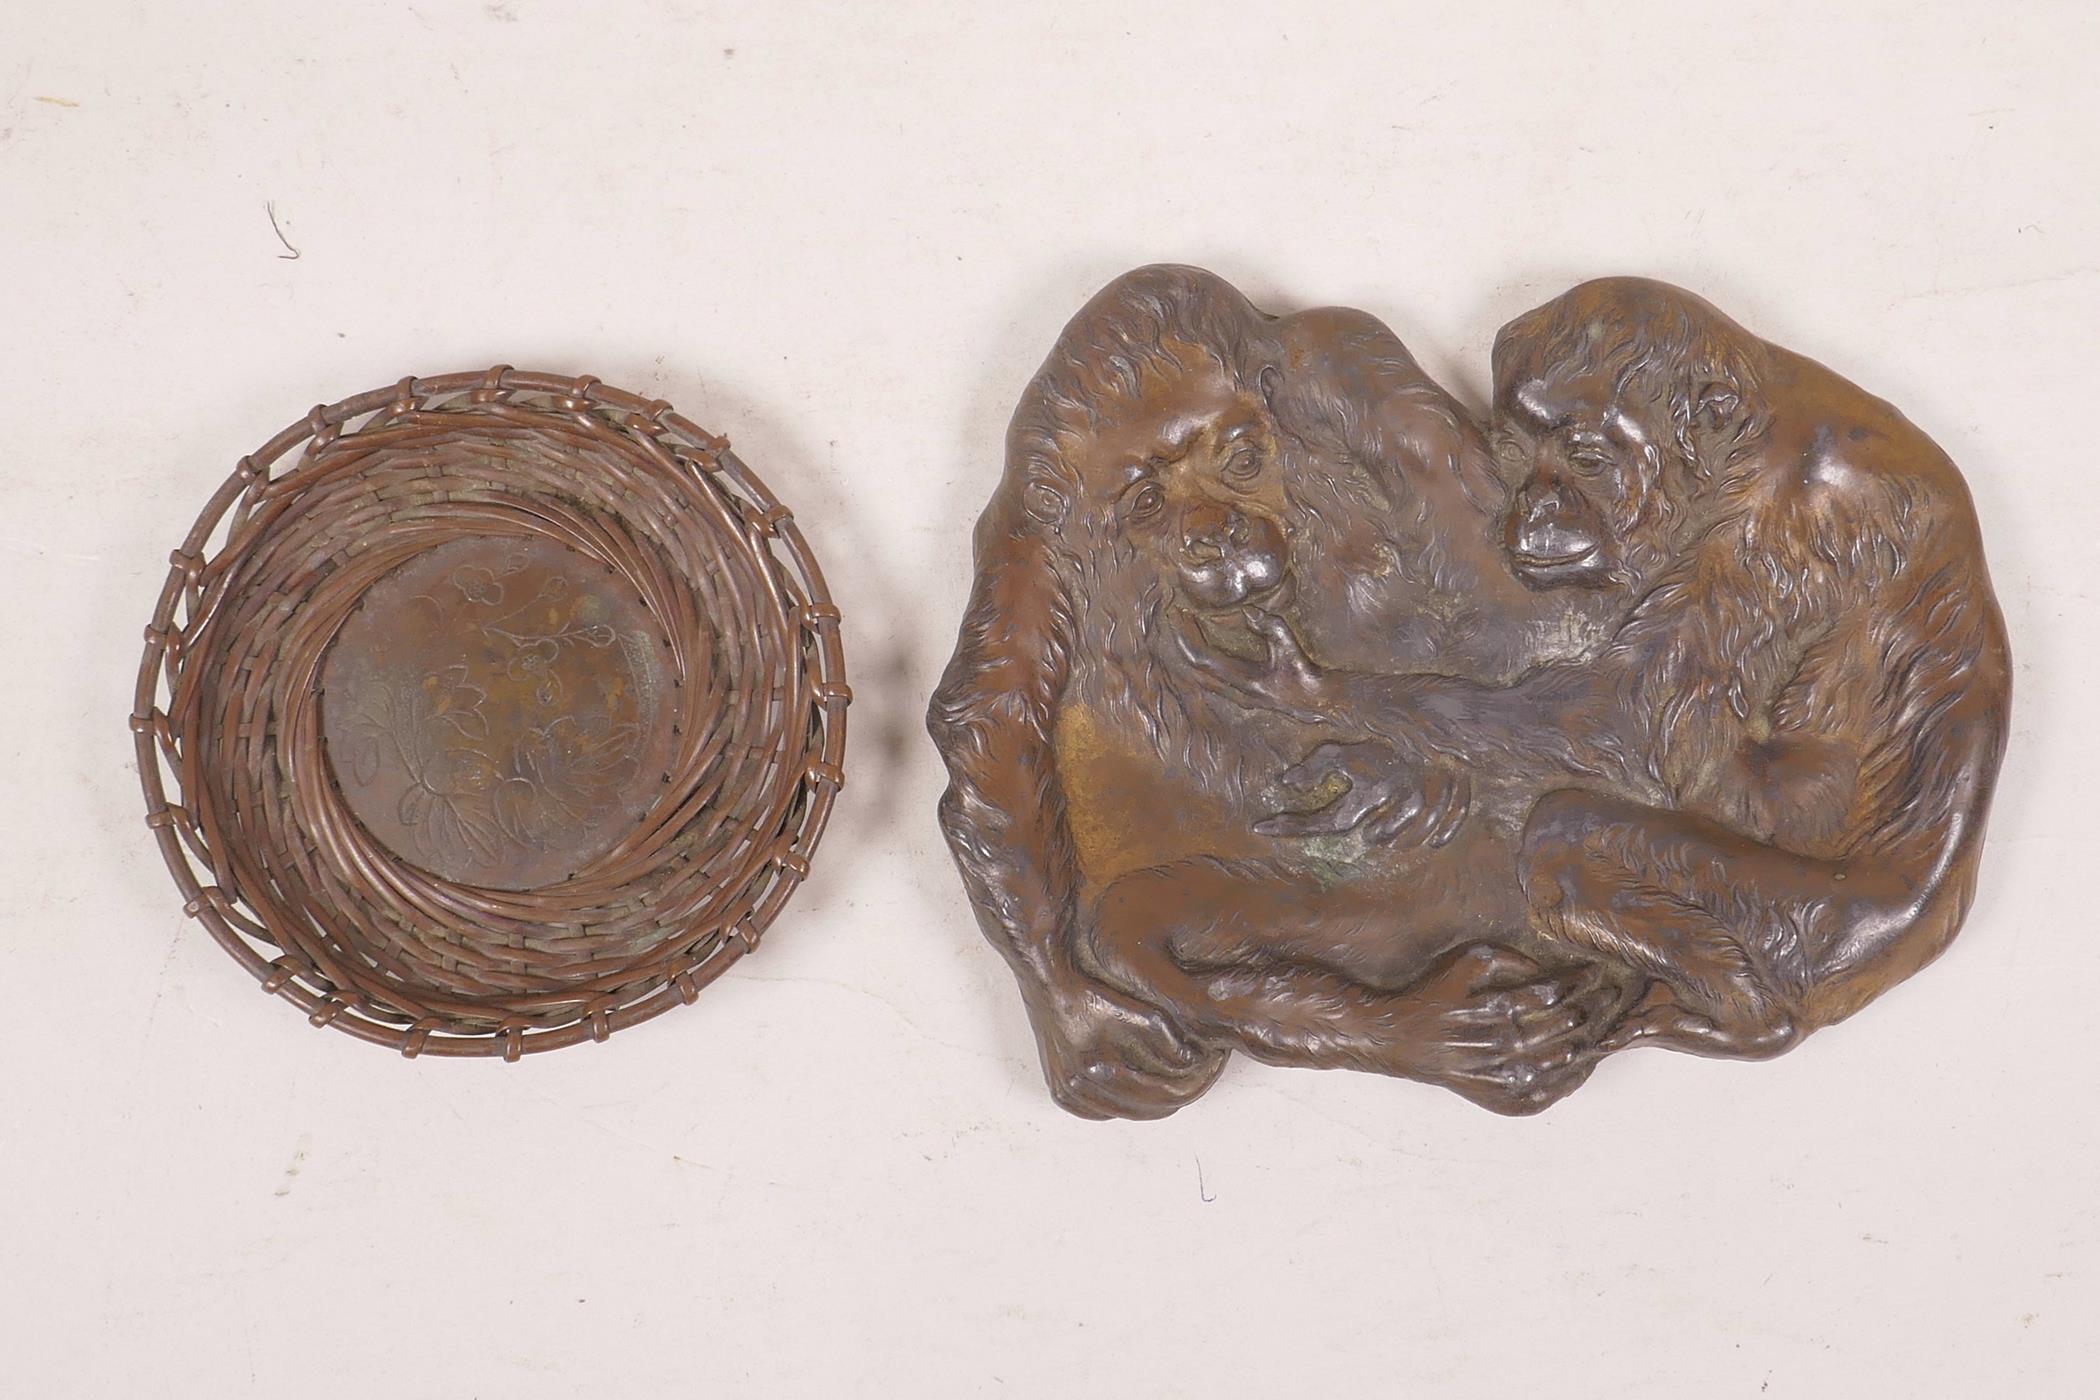 A Japanese Meji bronze shallow dish in the form of two monkeys, together with a Meiji woven bronze